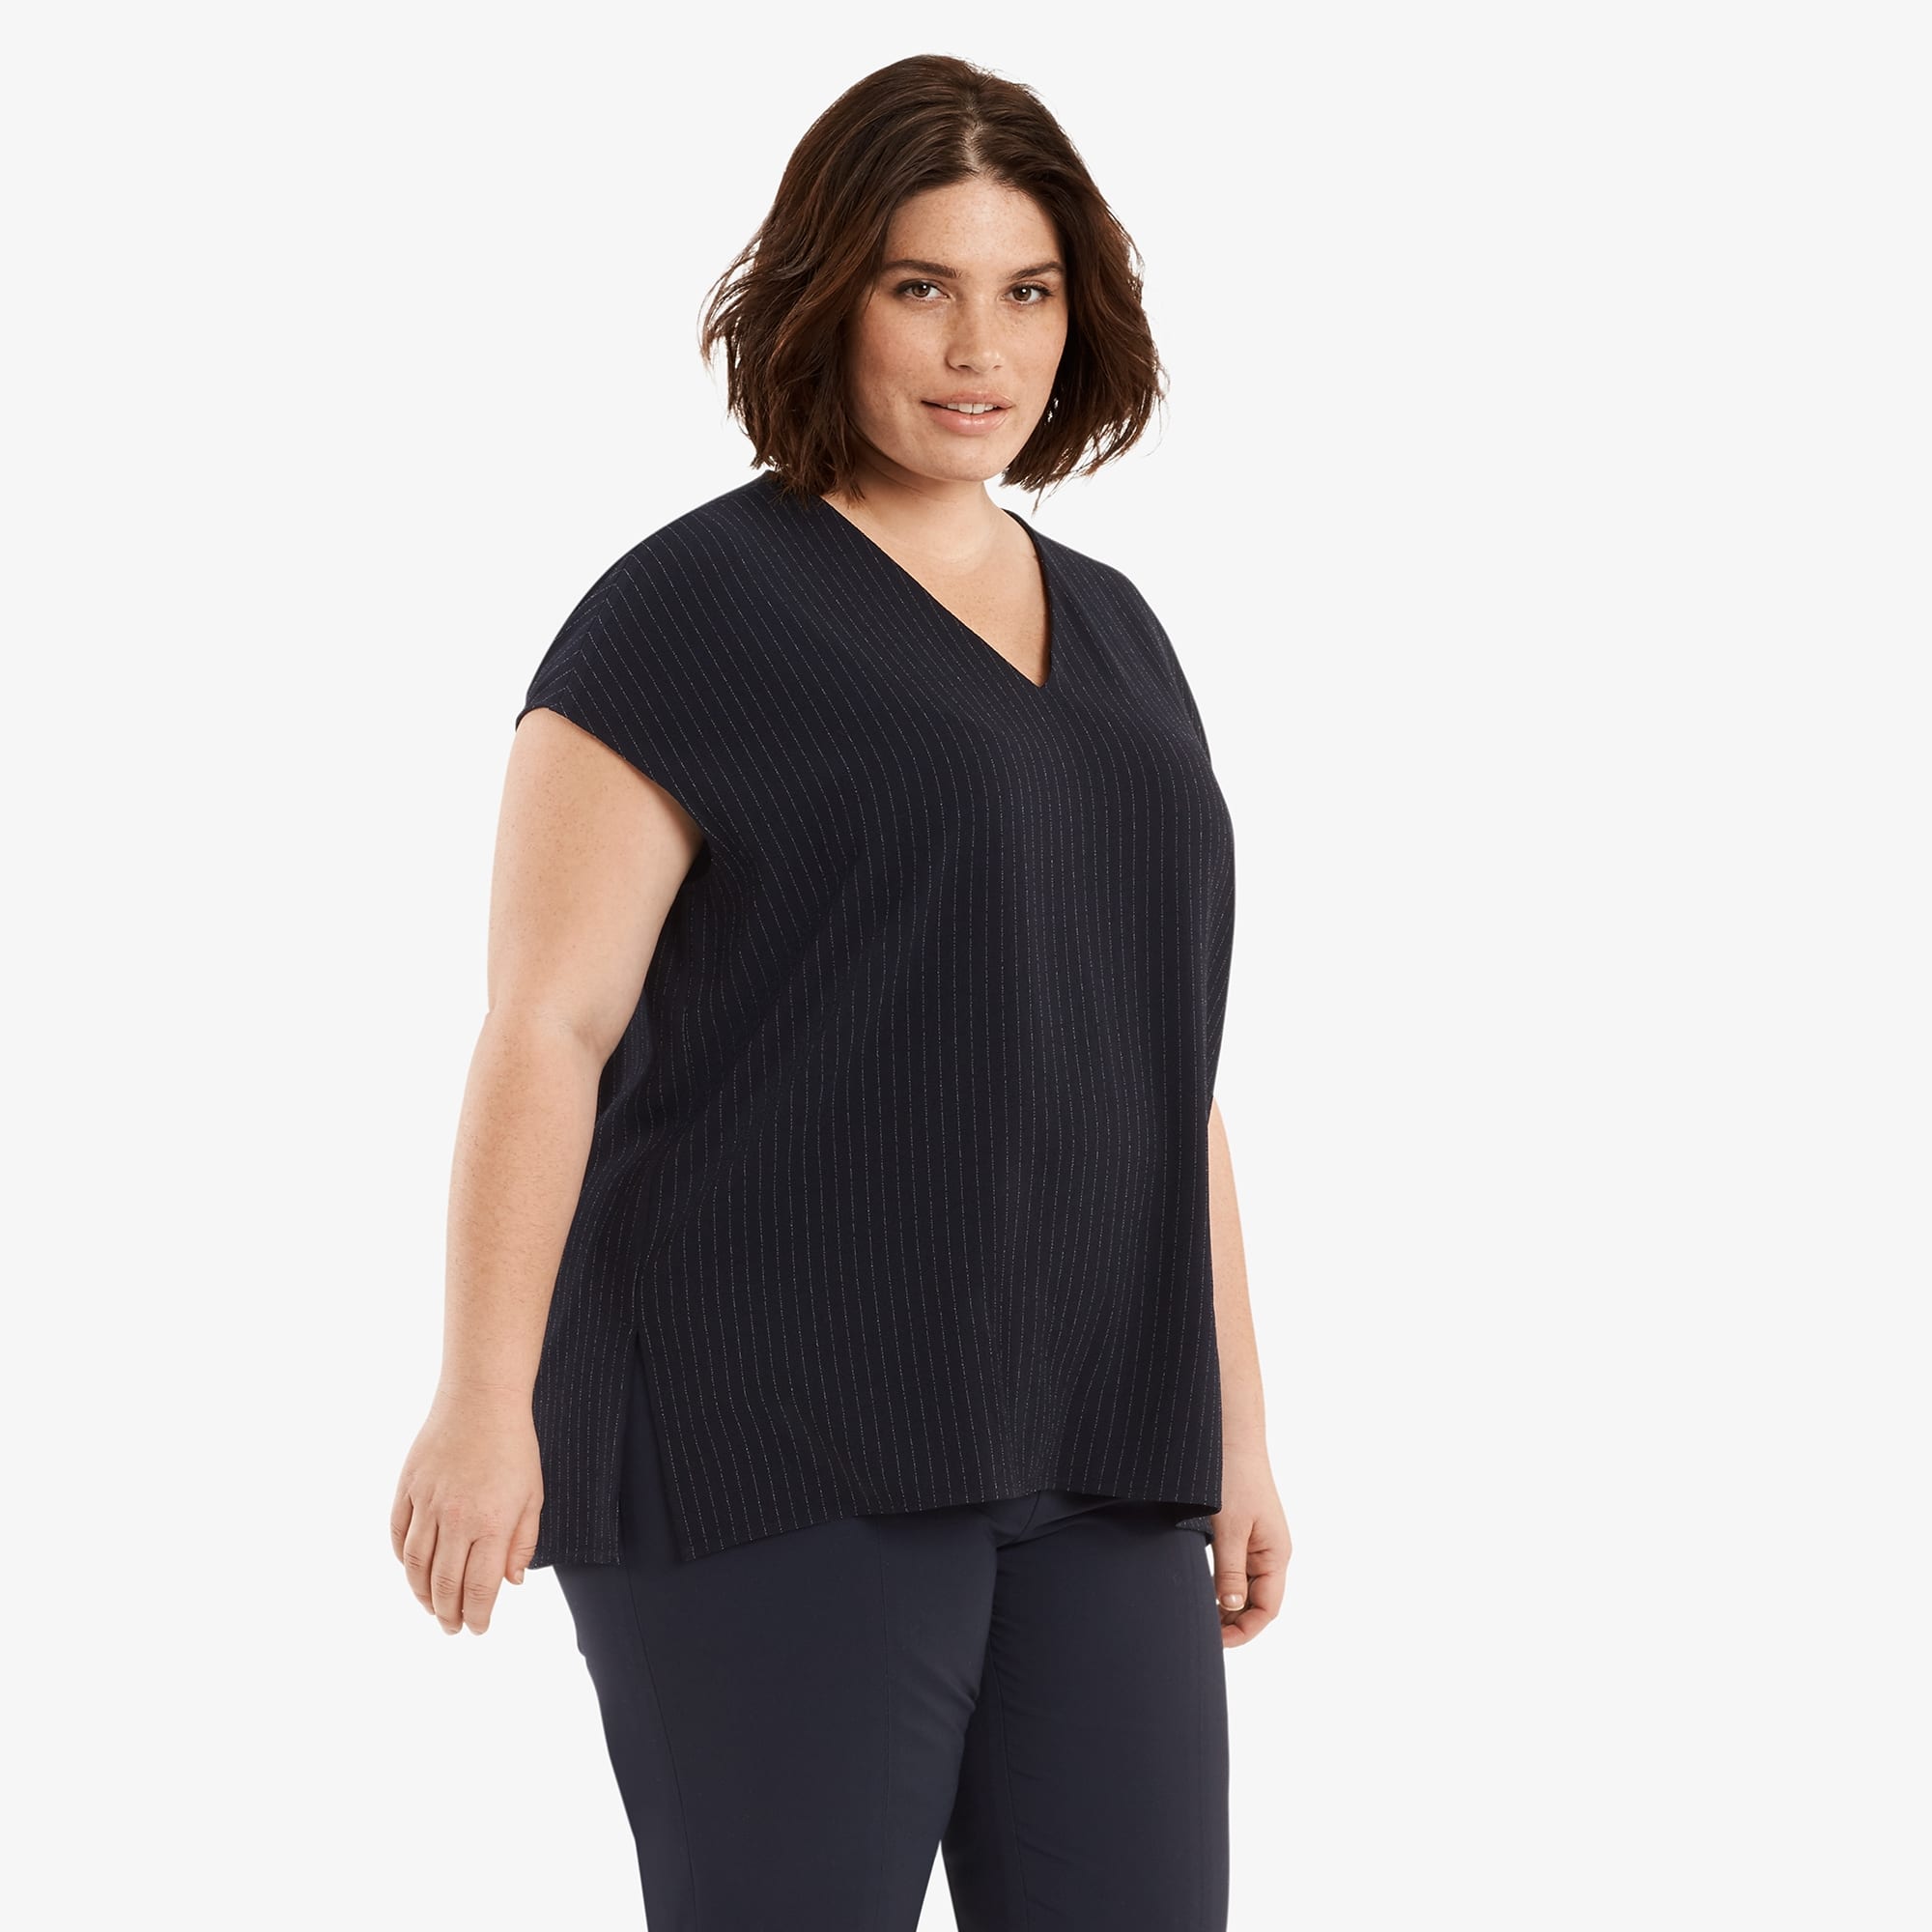 Side image of a woman standing wearing the Townsend Top in navy/white